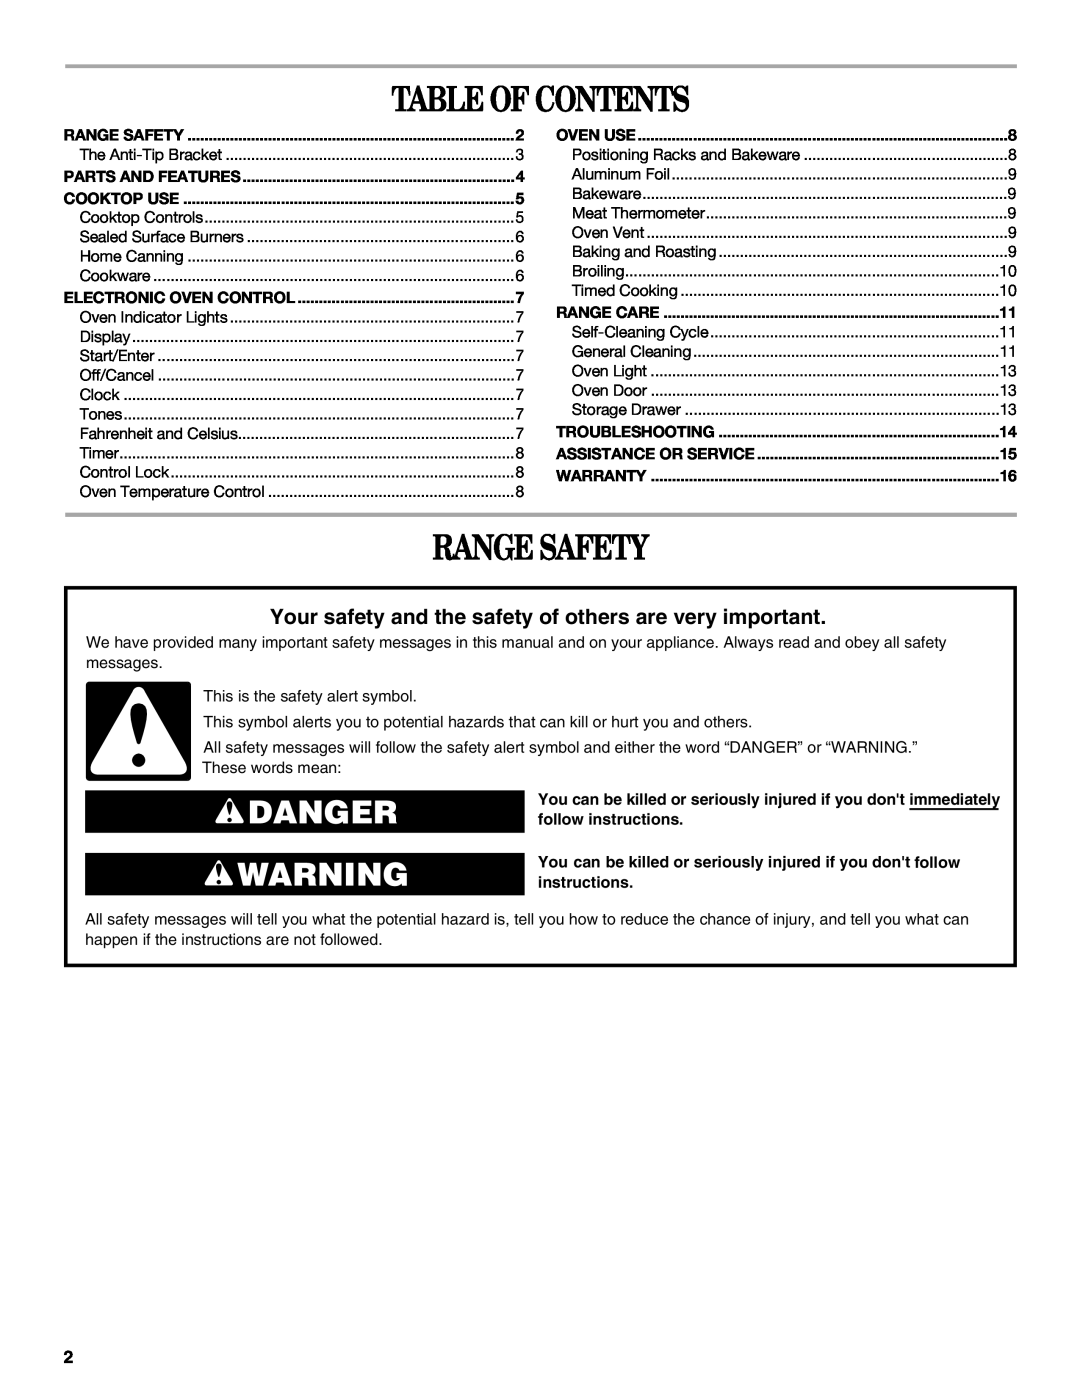 Whirlpool IGS325RQ1 manual Table Of Contents, Range Safety, Danger 